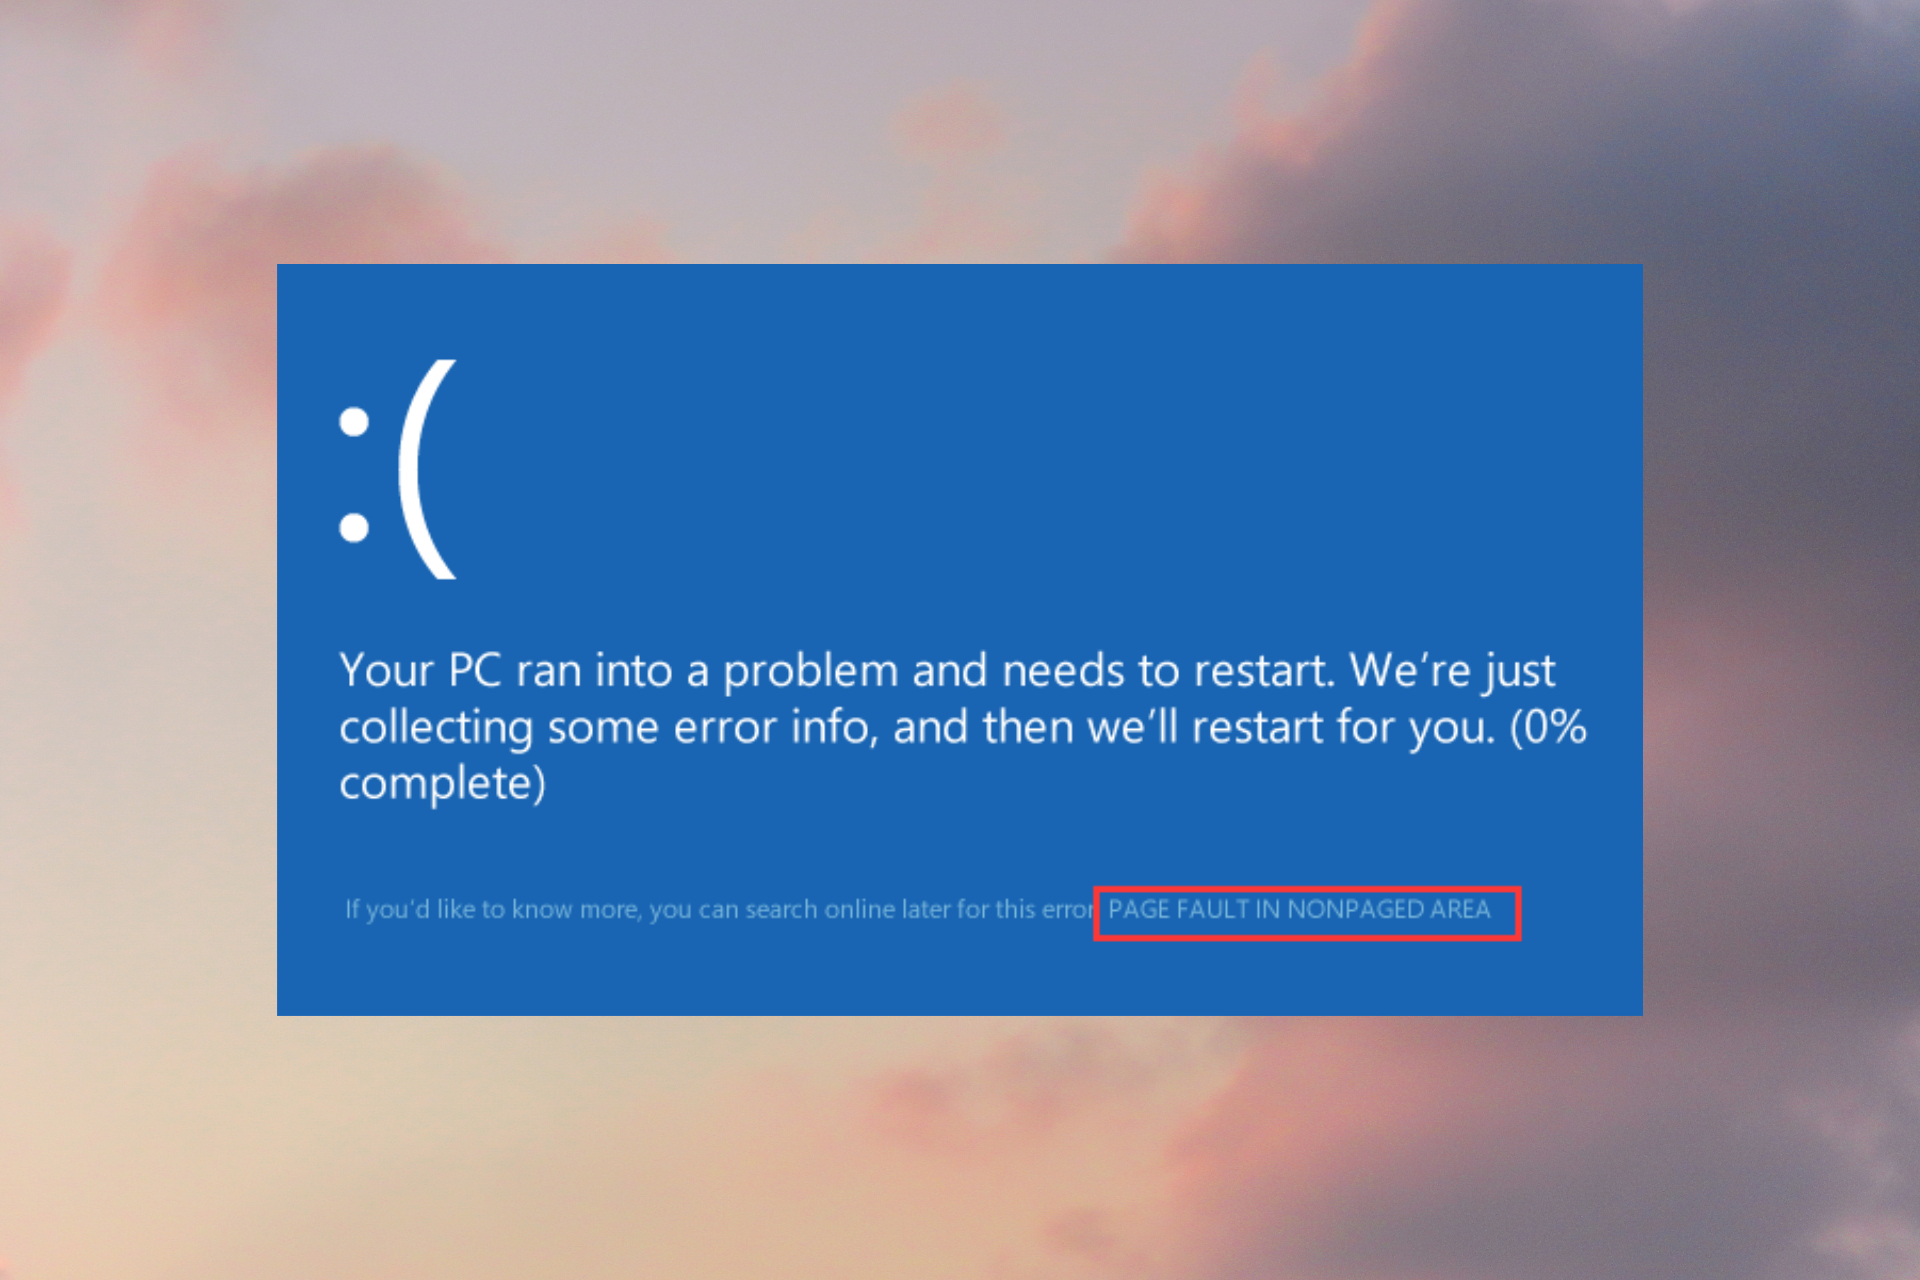 How to fix Page Fault in Nonpaged Area on Windows 10